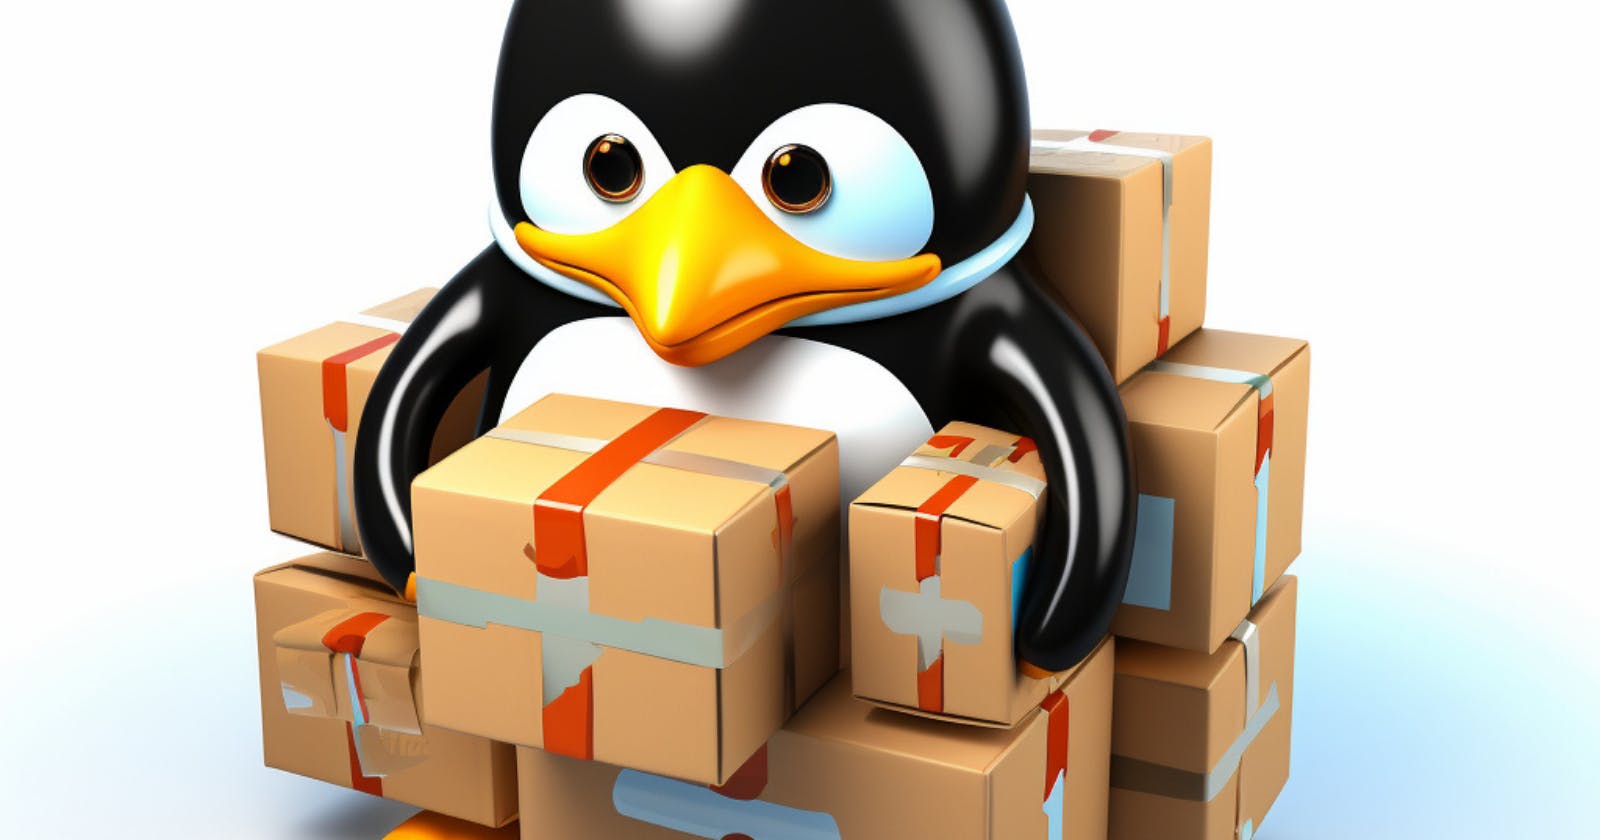 Easy Ways to Check Linux Packages Installed on Your System